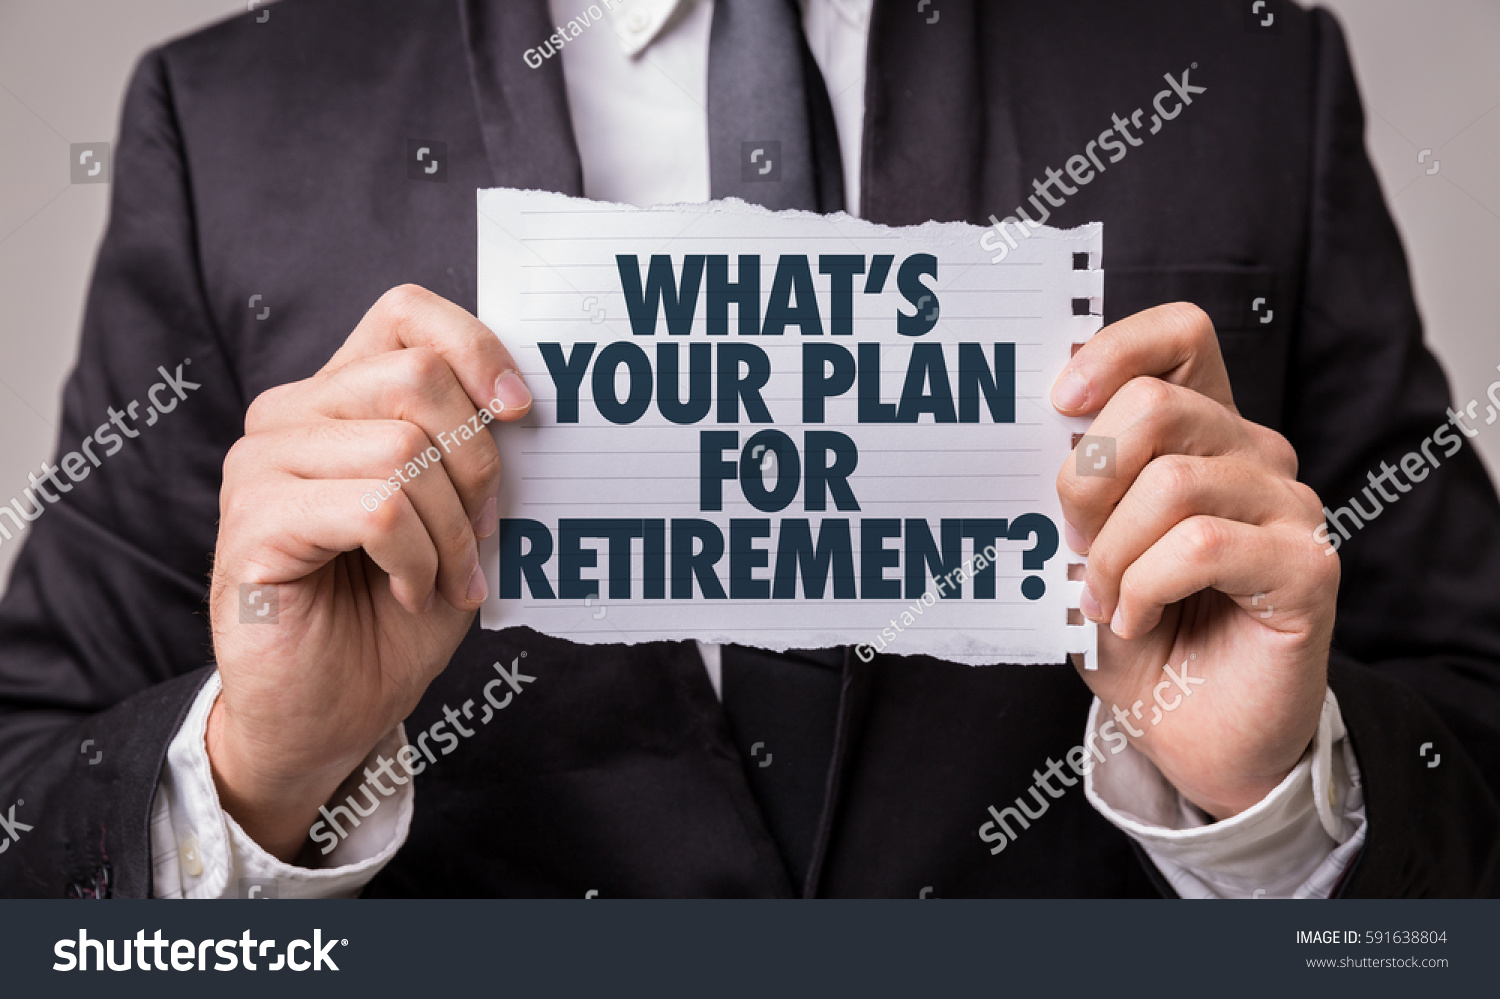 Whats Your Plan for Retirement? #591638804